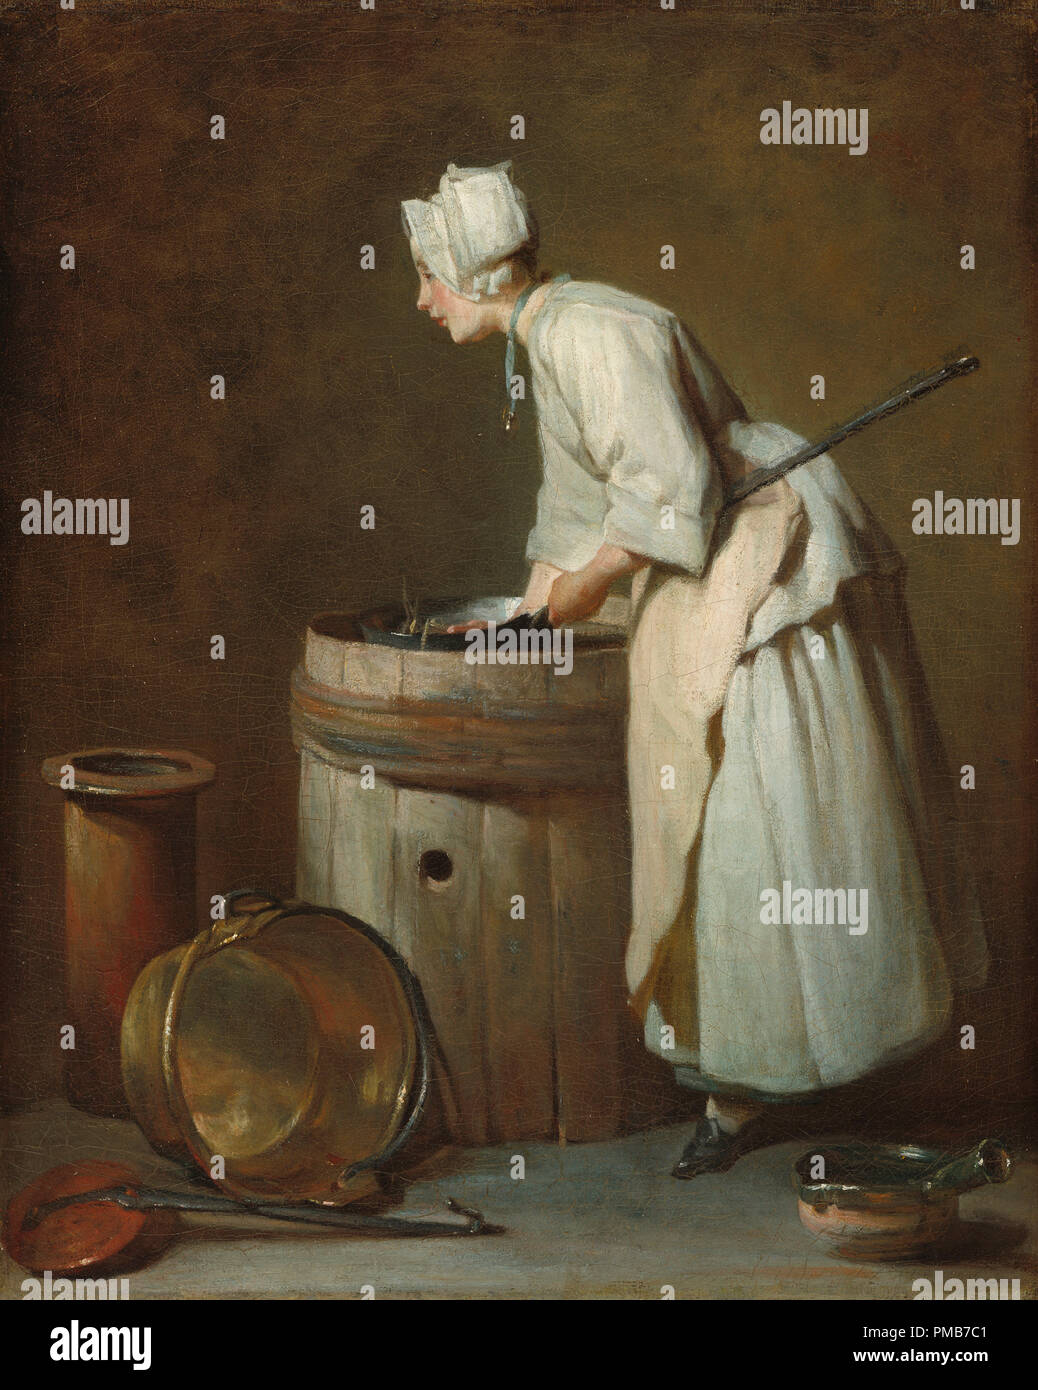 The Scullery Maid. Dated: c. 1738. Dimensions: overall: 47 × 38.1 cm (18 1/2 × 15 in.)  framed: 62.23 × 53.34 × 9.53 cm (24 1/2 × 21 × 3 3/4 in.). Medium: oil on canvas. Museum: National Gallery of Art, Washington DC. Author: CHARDIN, JEAN-BAPTISTE-SIMEON. Jean Baptiste Simeon Chardin. Stock Photo